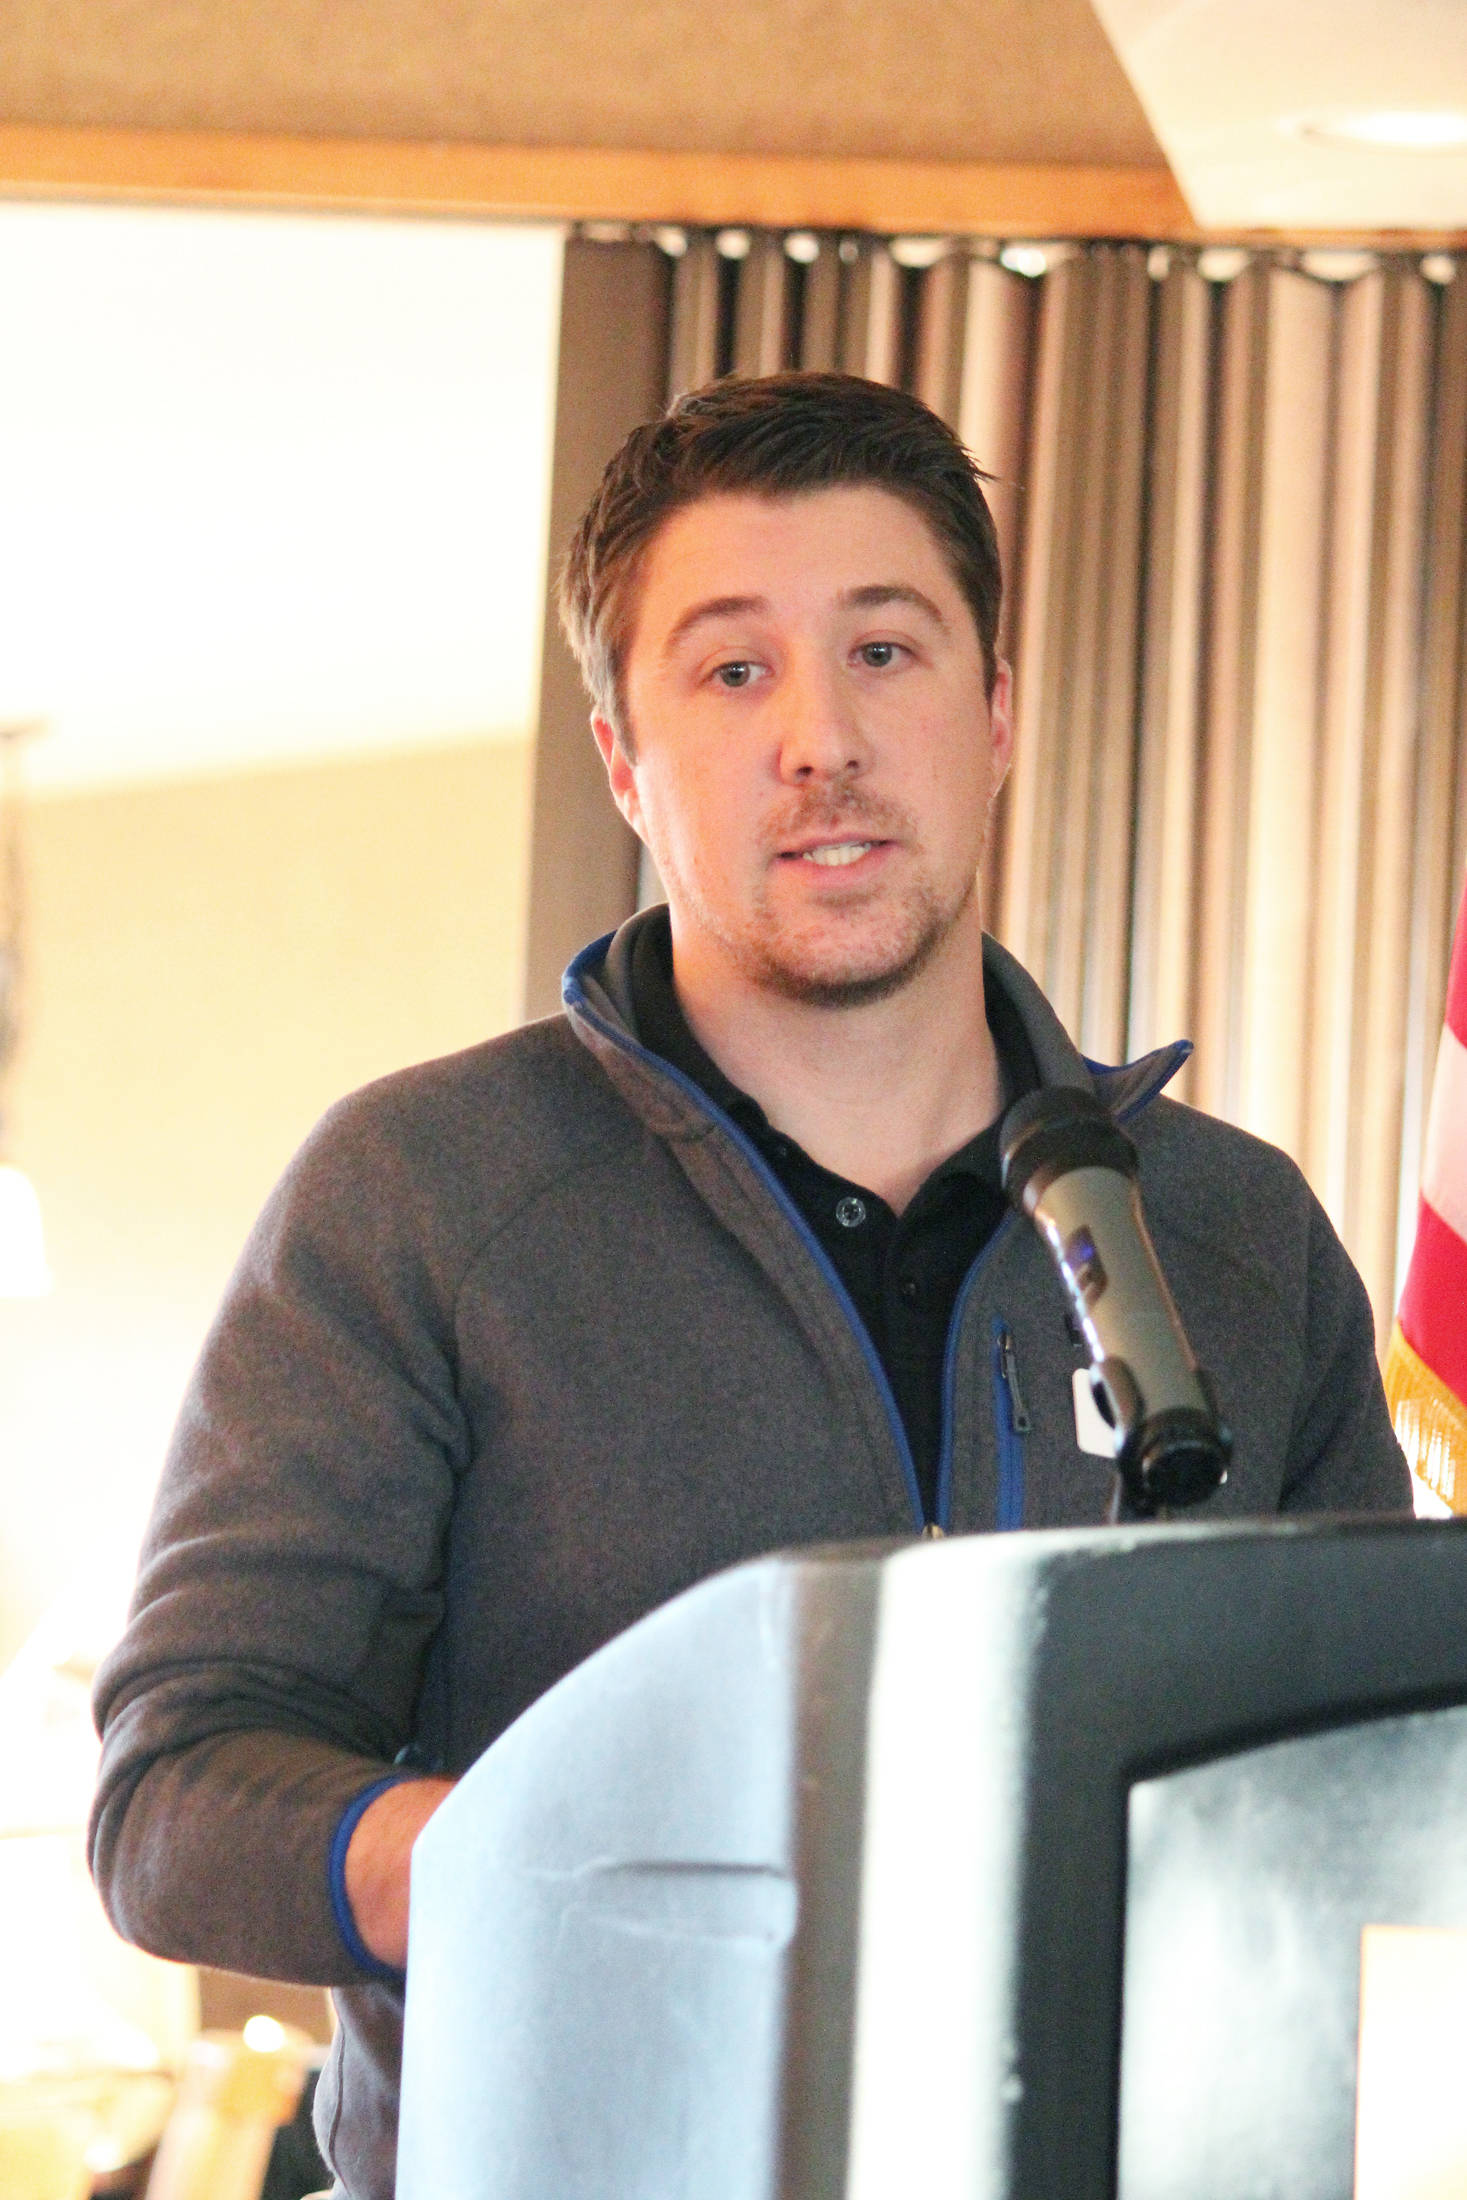 Patrick Mede, vice president of the Homer Chamber of Commerce Board of Directors, tells a crowd about the chamber’s finances over the last year during the annual chamber meeting Tuesday, Jan. 15, 2019 at the Best Western Bidarka Inn in Homer, Alaska. (Photo by Megan Pacer/Homer News)